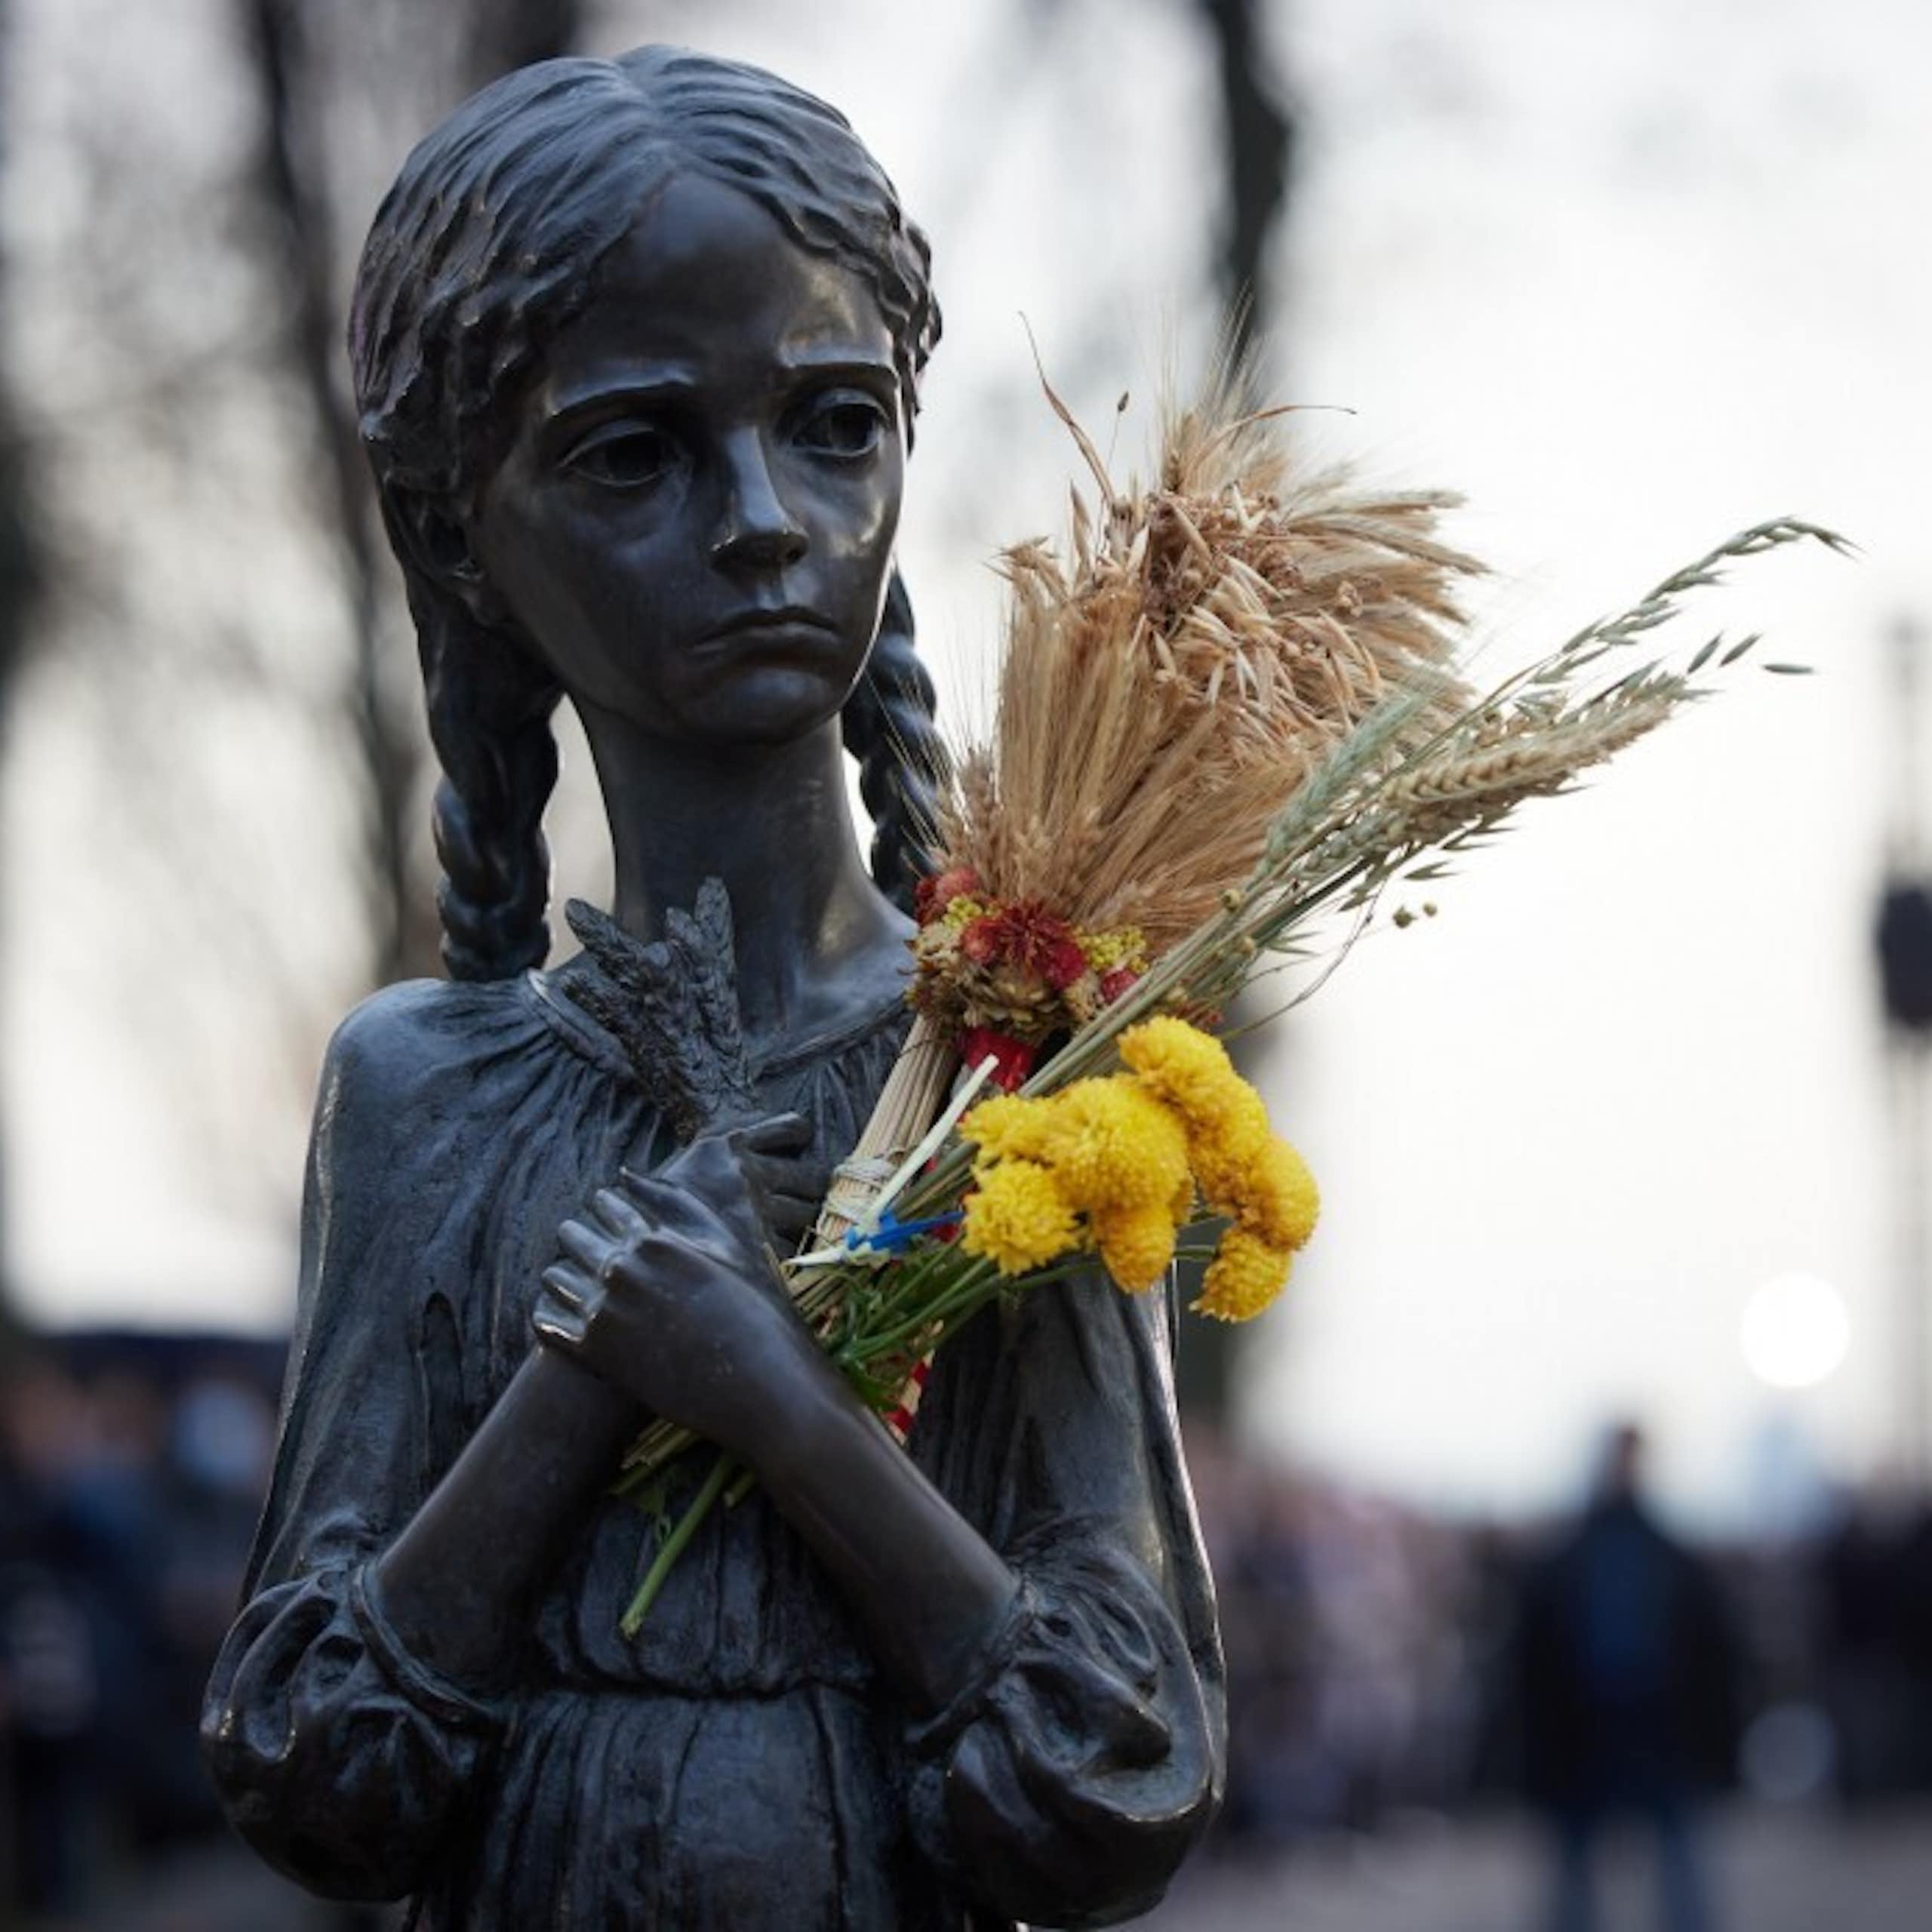 A statue of a girl during the Ukrainian famine, in which someone has placed wheat and flowers.